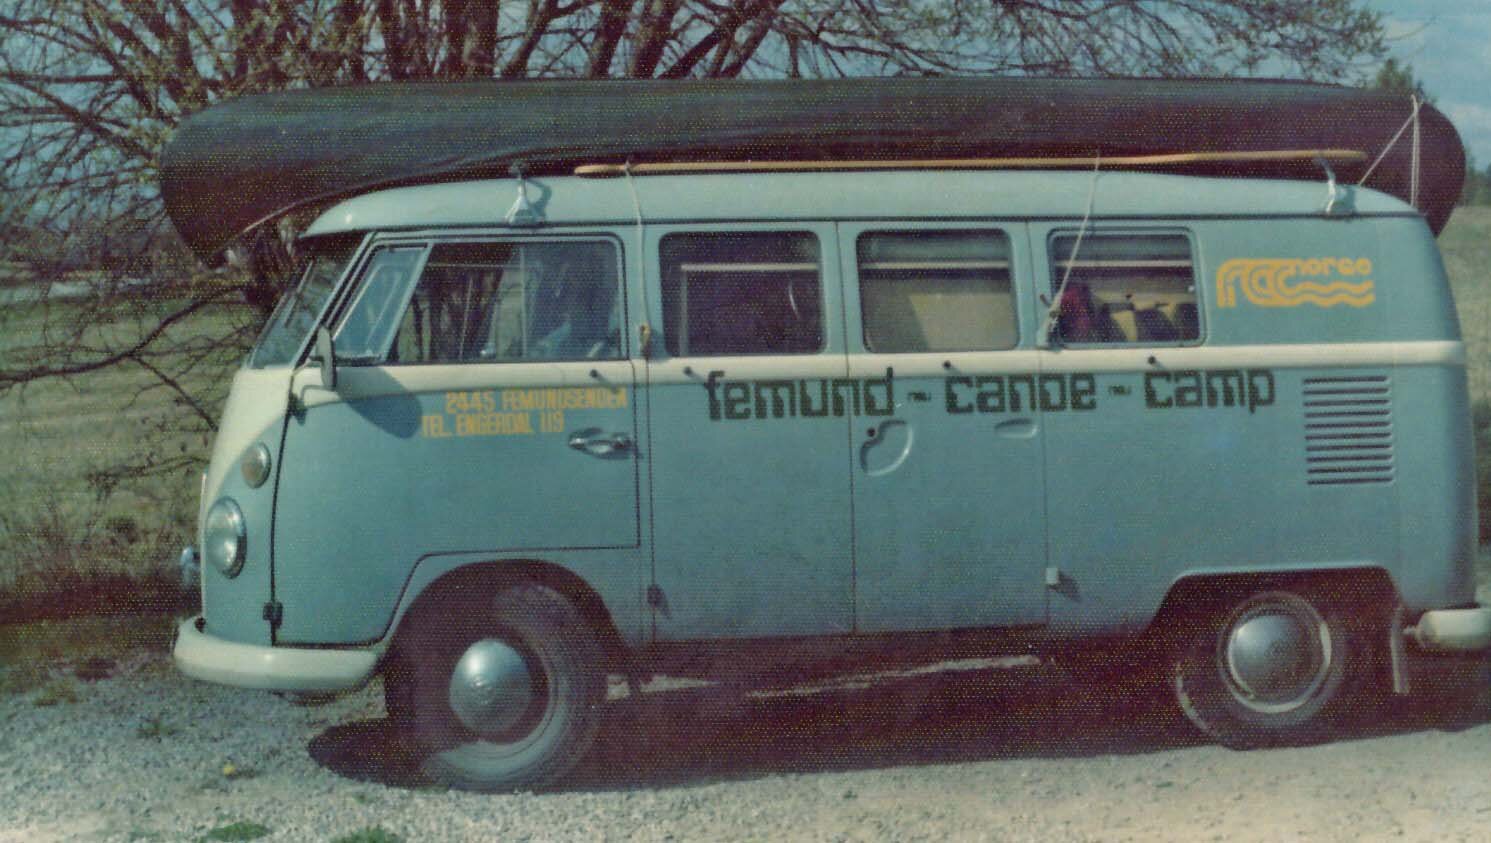  1974. The first FCC bus. 